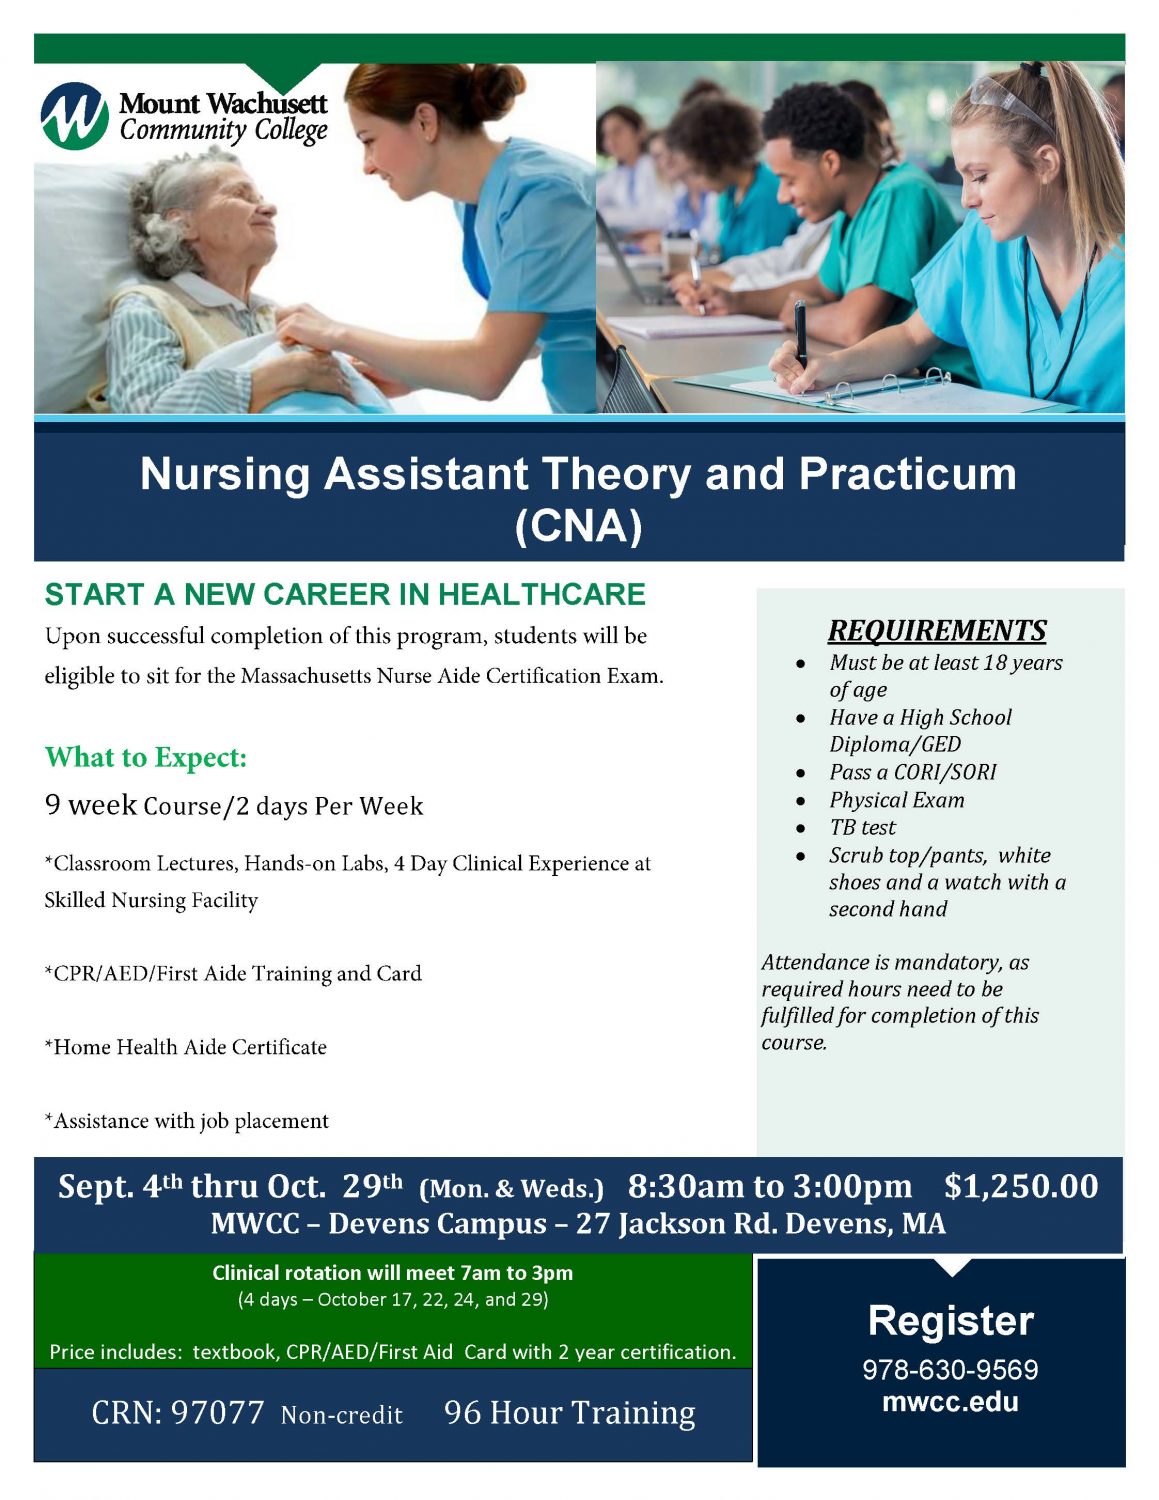 CNA Nursing Assistant Theory and Practicum Flyer North Central